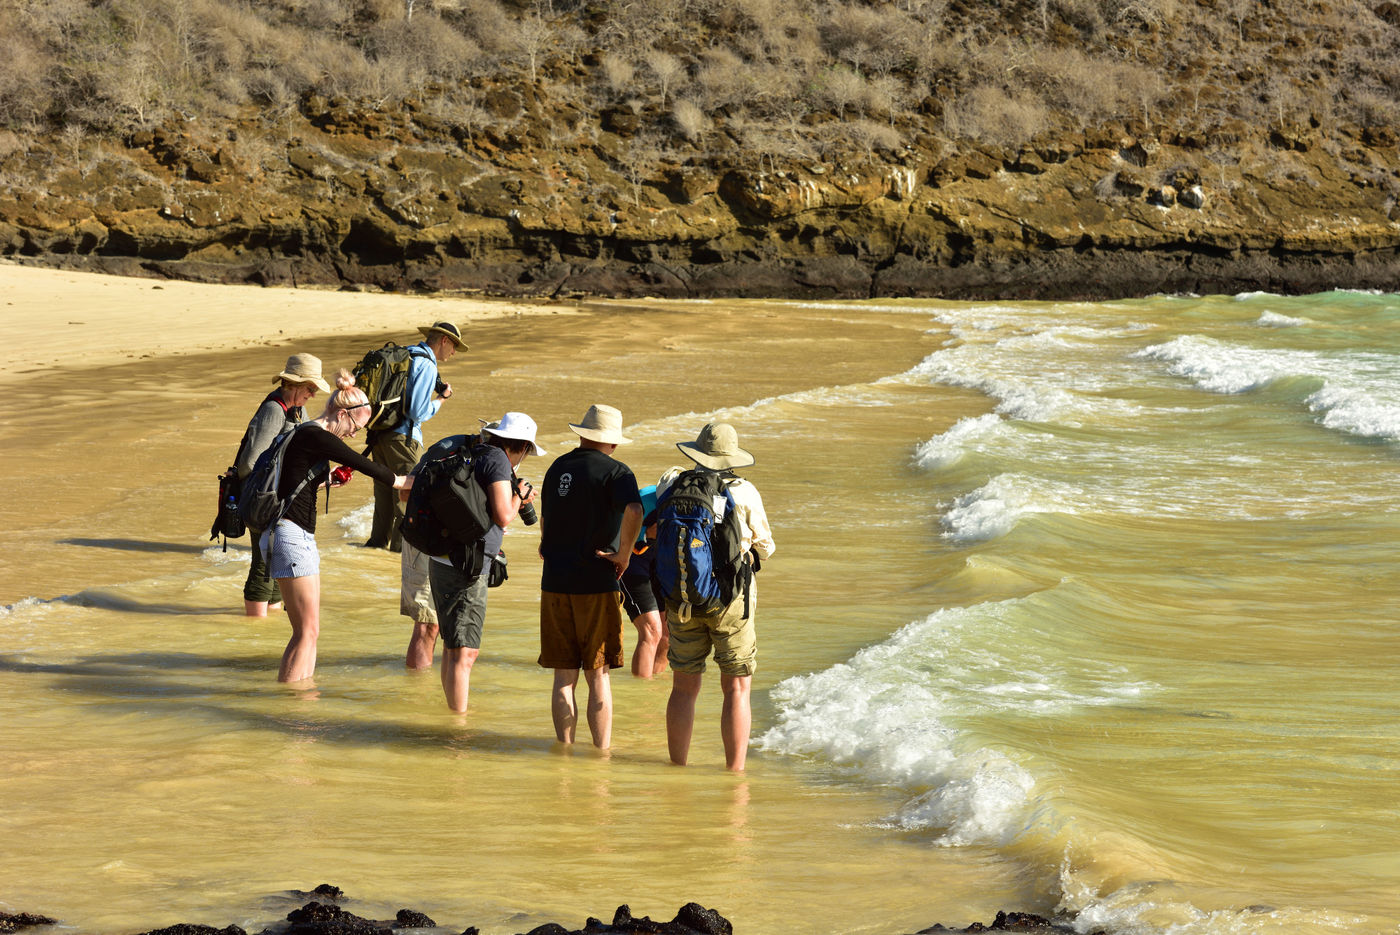 The group in the surf on one of the islands. © Yves Adams